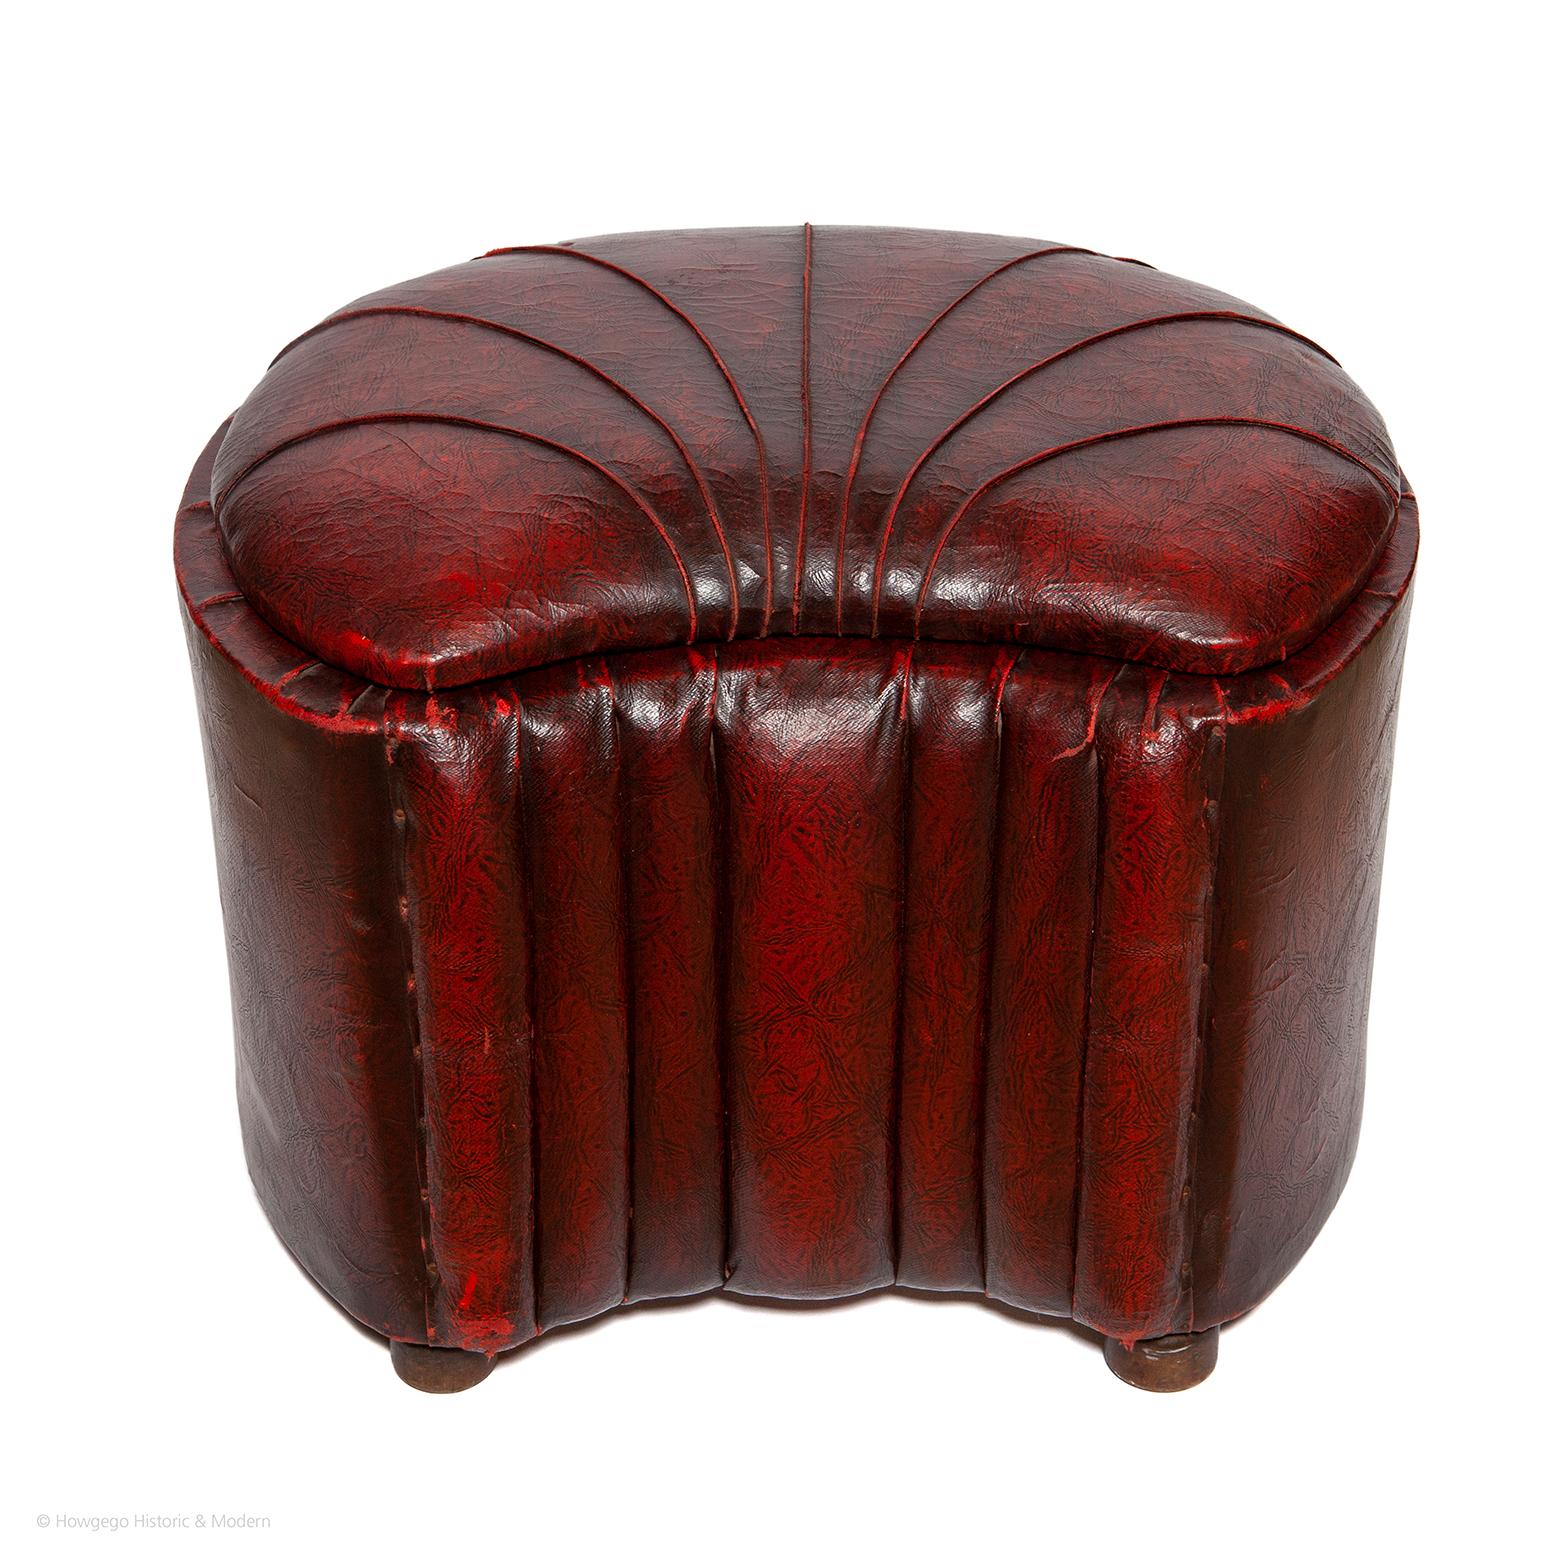 - Rare Art Deco period stool with internal storage space
- Beautiful scallop shape form and seat decoration, with architectural front
- Rich burgundy color with a lustrous patina

The scallop shaped lift-up seat defined with self-piping.